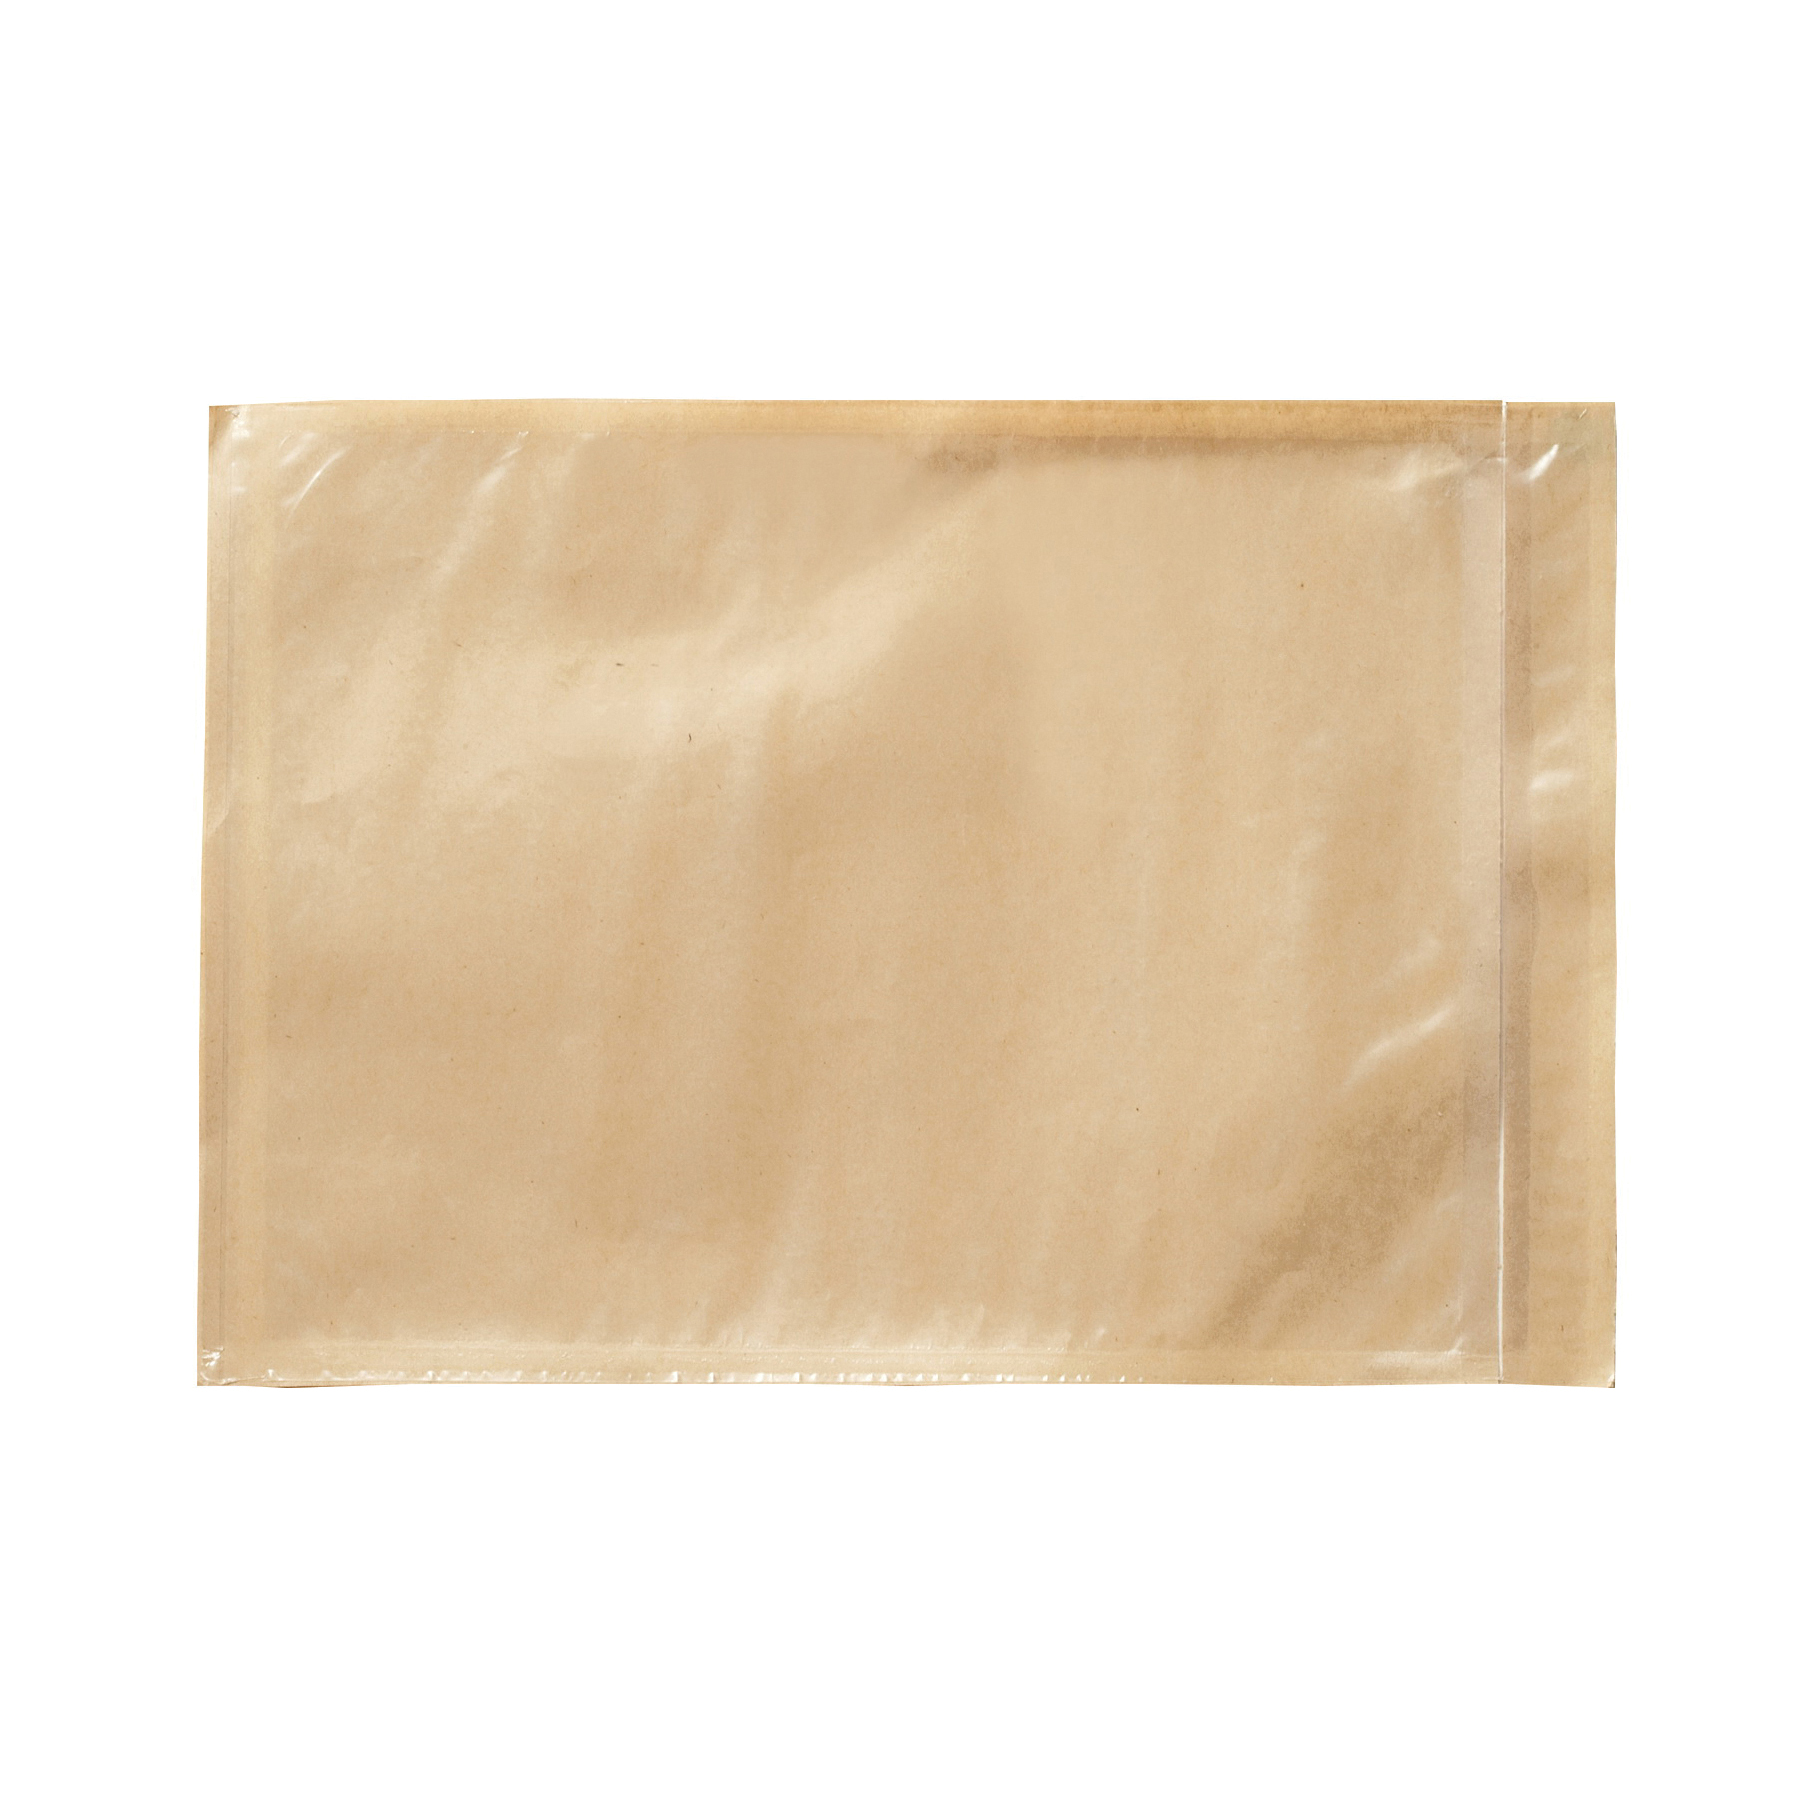 3M™ 051125-74928 PLE-NP1 PK500 Non-Printed Packing List Envelope, 5-1/2 in L x 4-1/2 in W, Polyethylene Film Backing, Clear